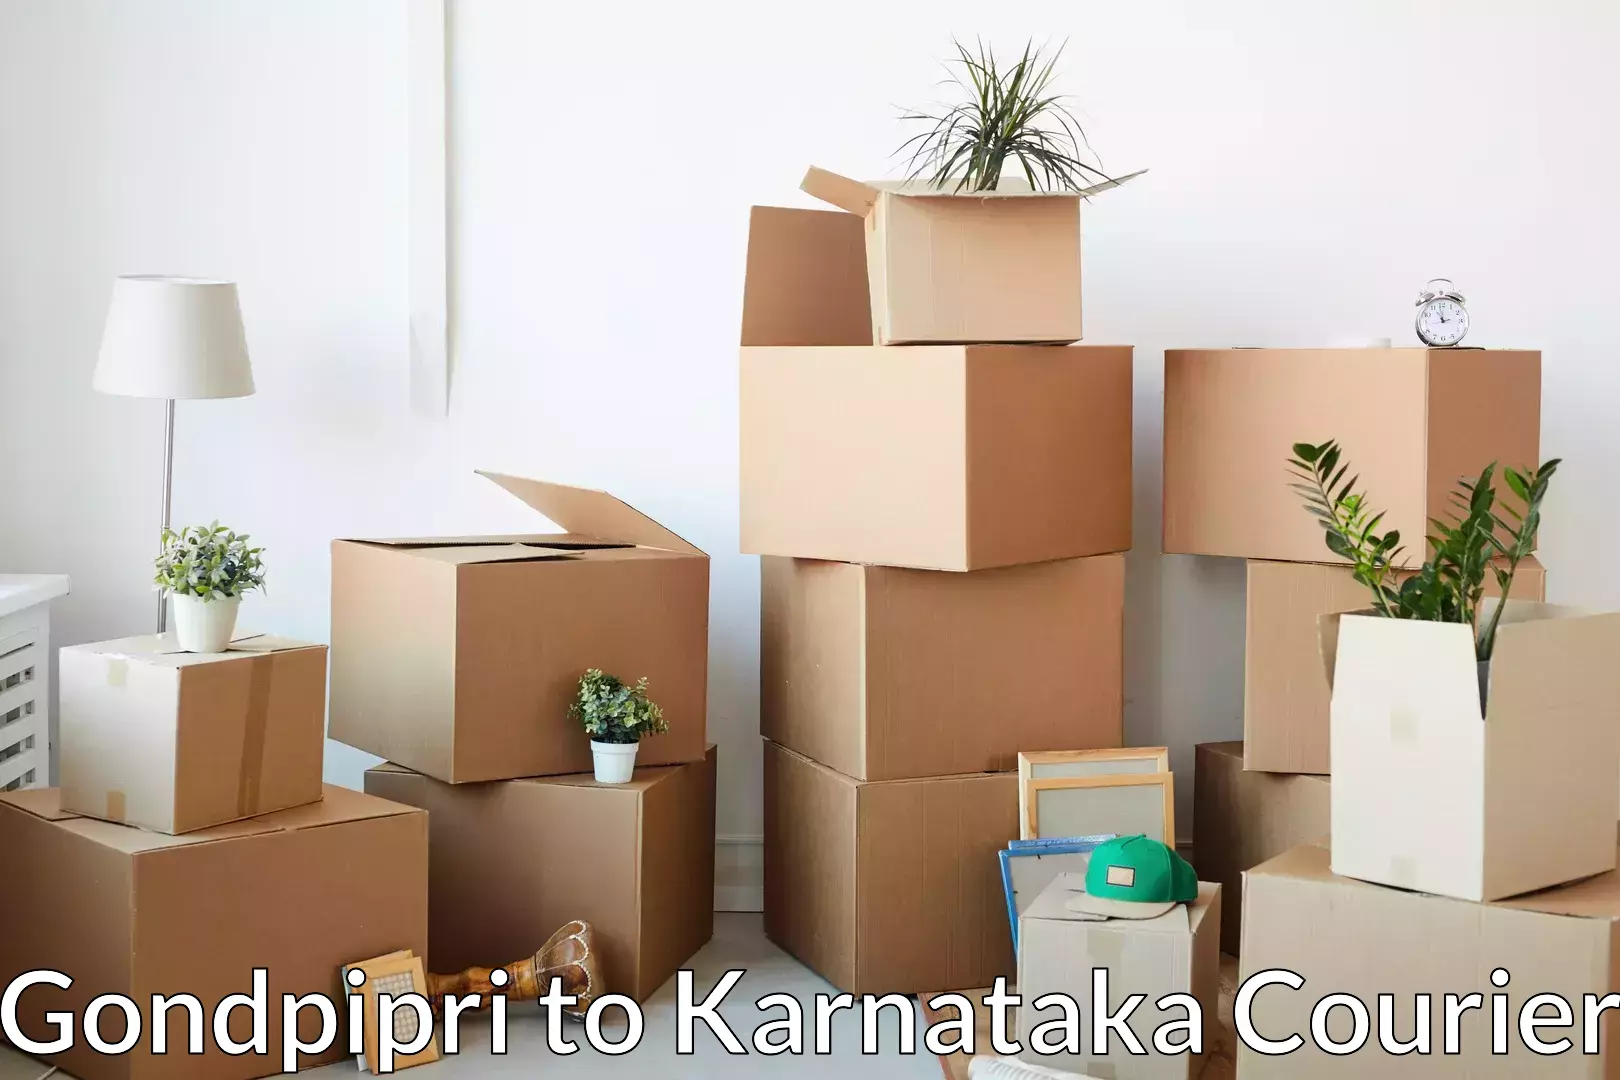 Home moving specialists Gondpipri to Manipal